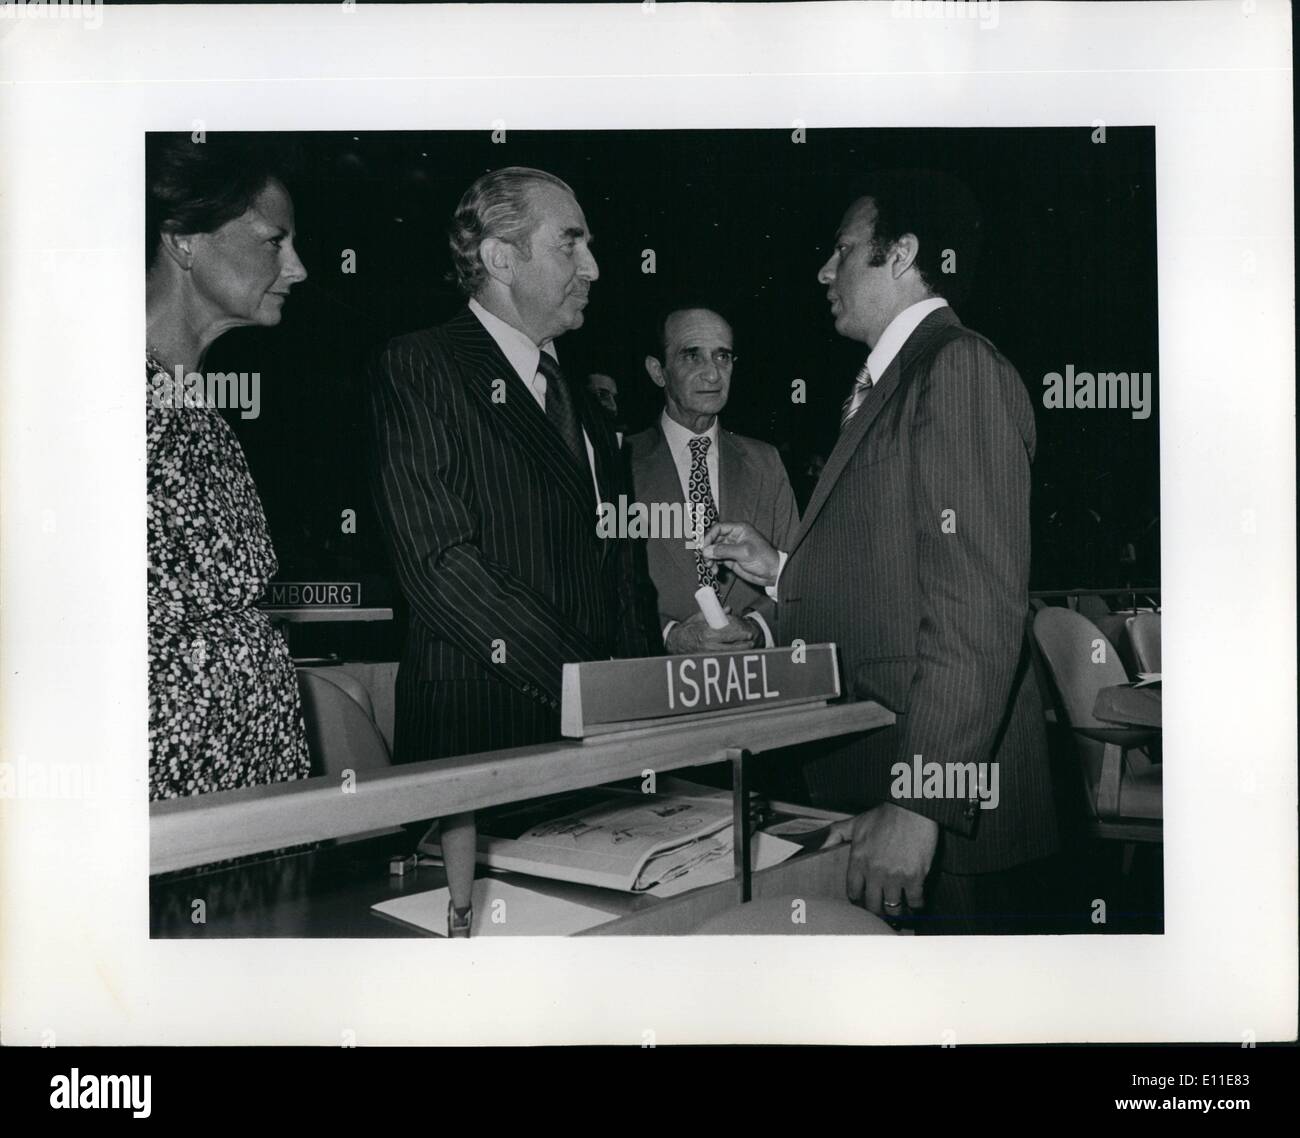 Sep. 09, 1977 - United Nations, Opening of General Assembly L-R Mr.Ilana Ben-Ani, Israeli Amb. Chiam Herzog, Chiam Landau and U.S. Amb.Andrew Young. Stock Photo